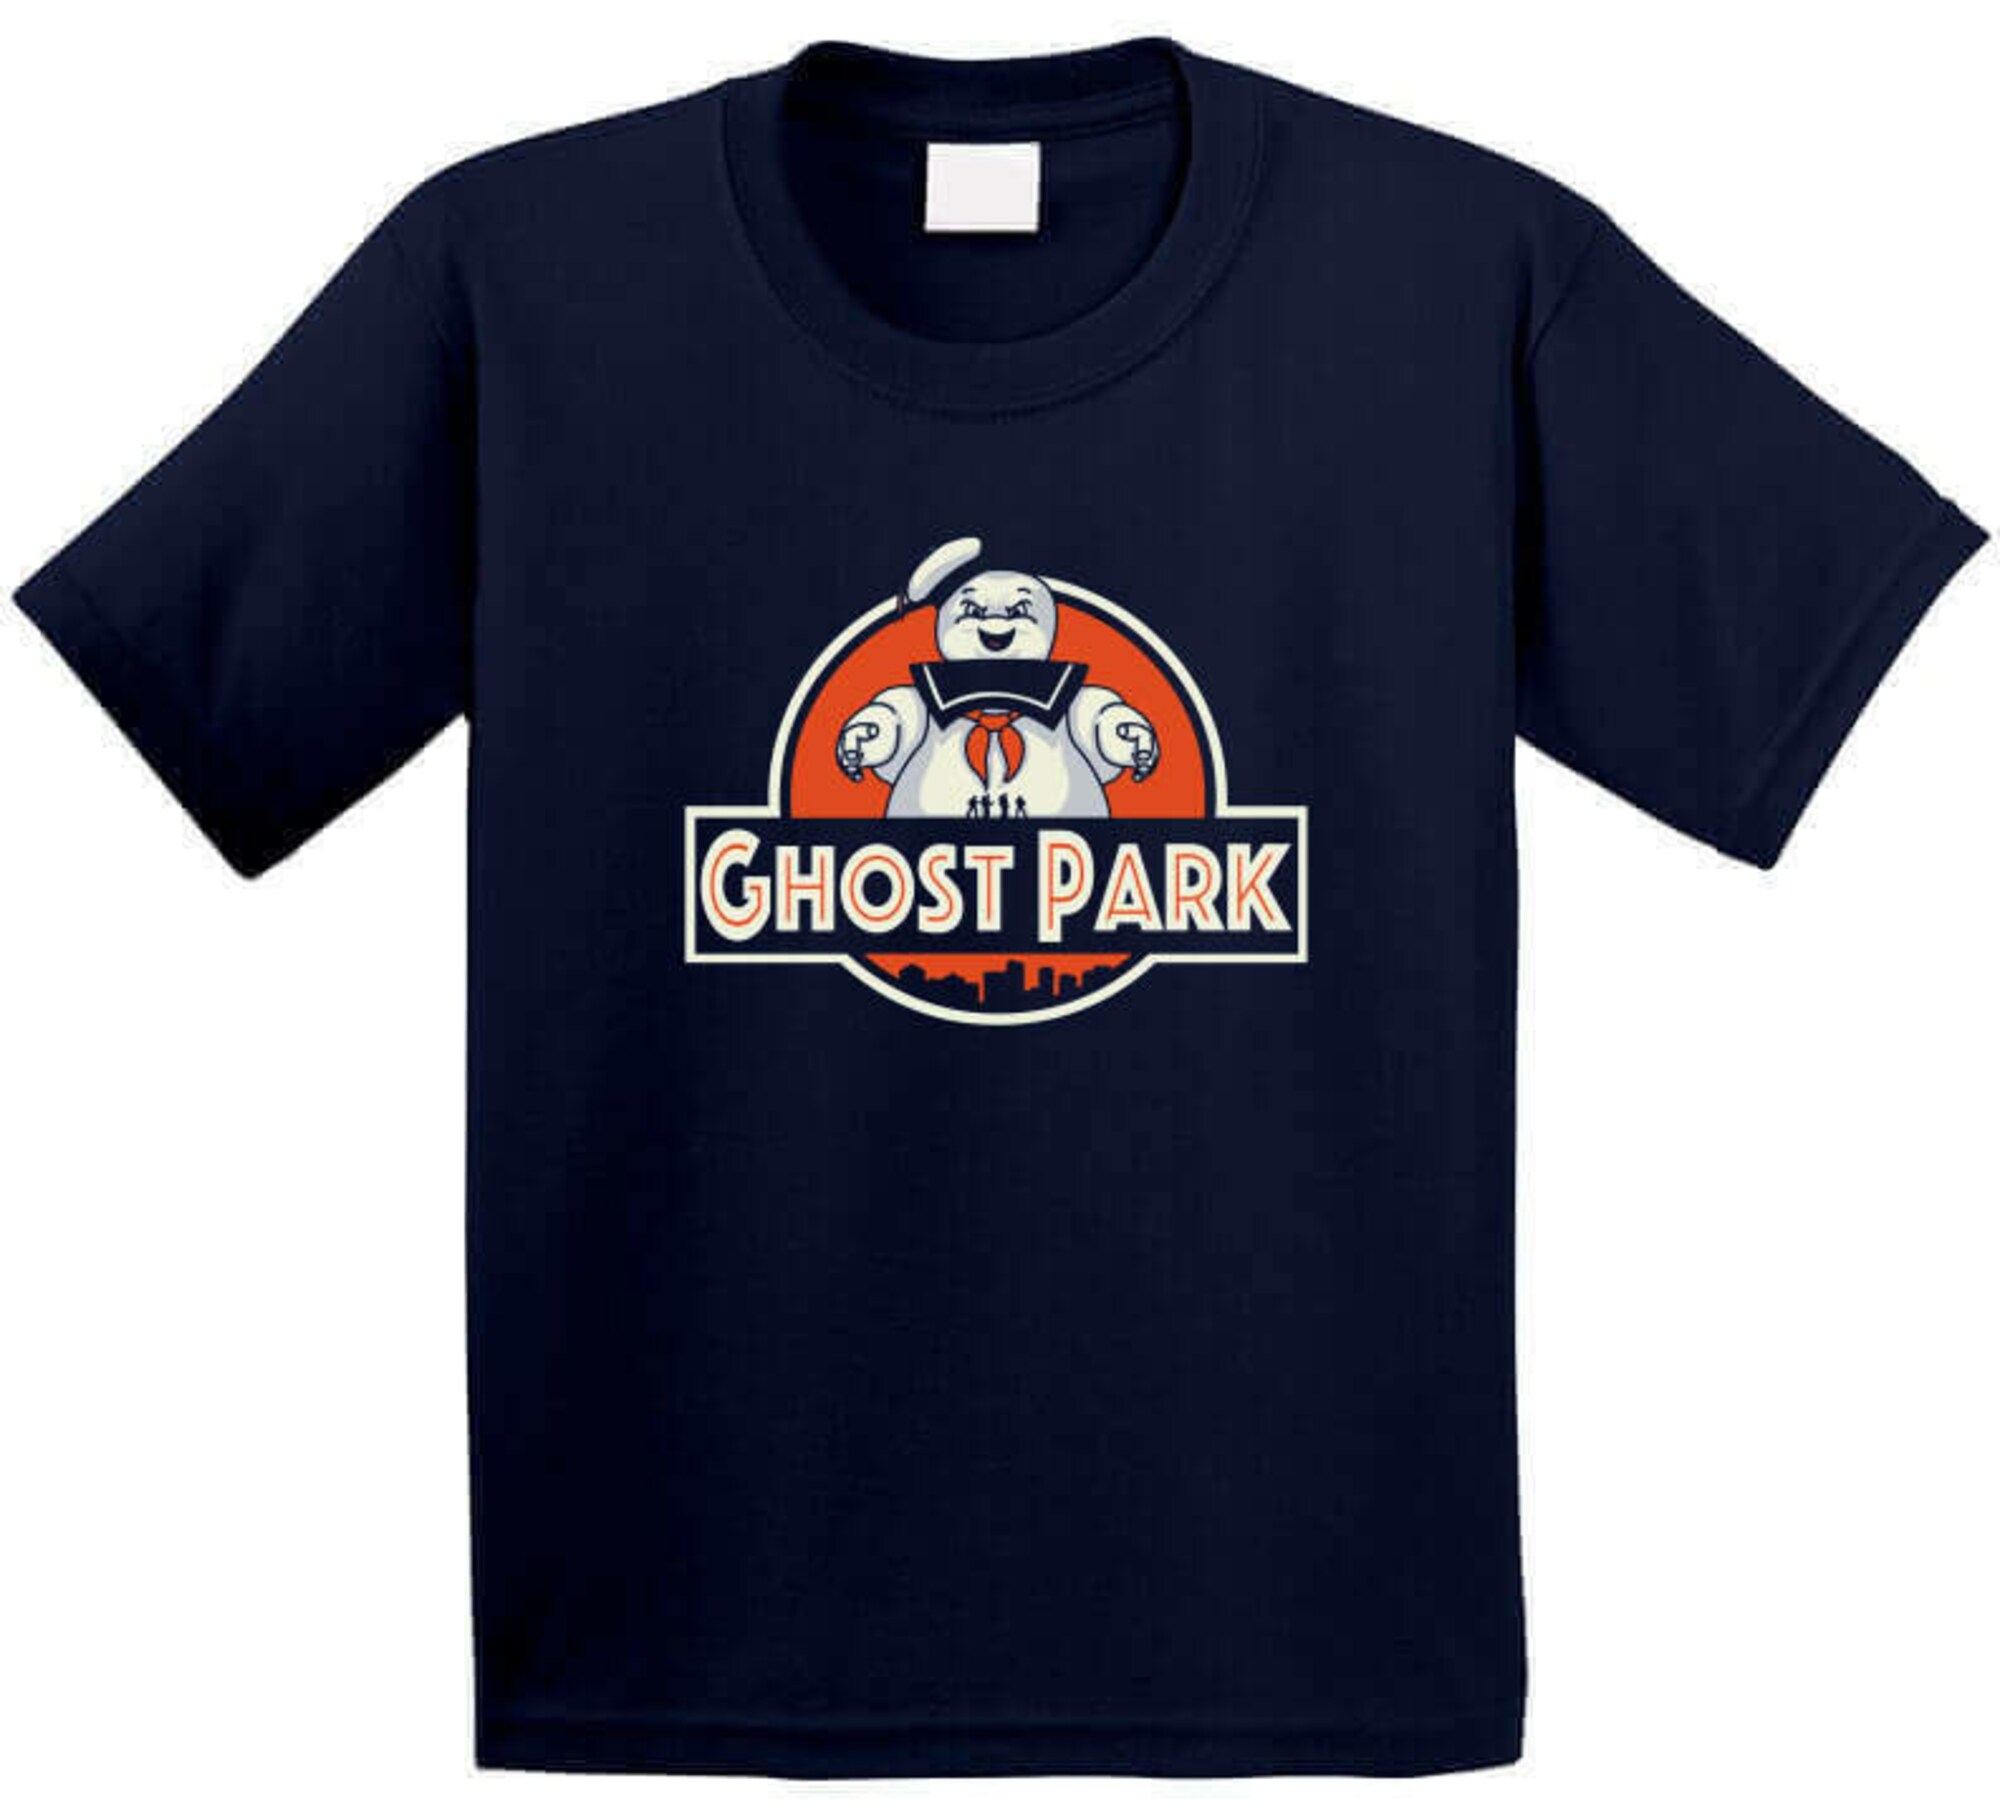 Discover Funny Ghost Park Jurassic Park Logo Mashup Ghost Busters Stay Puft Marshmellow Man T Shirt